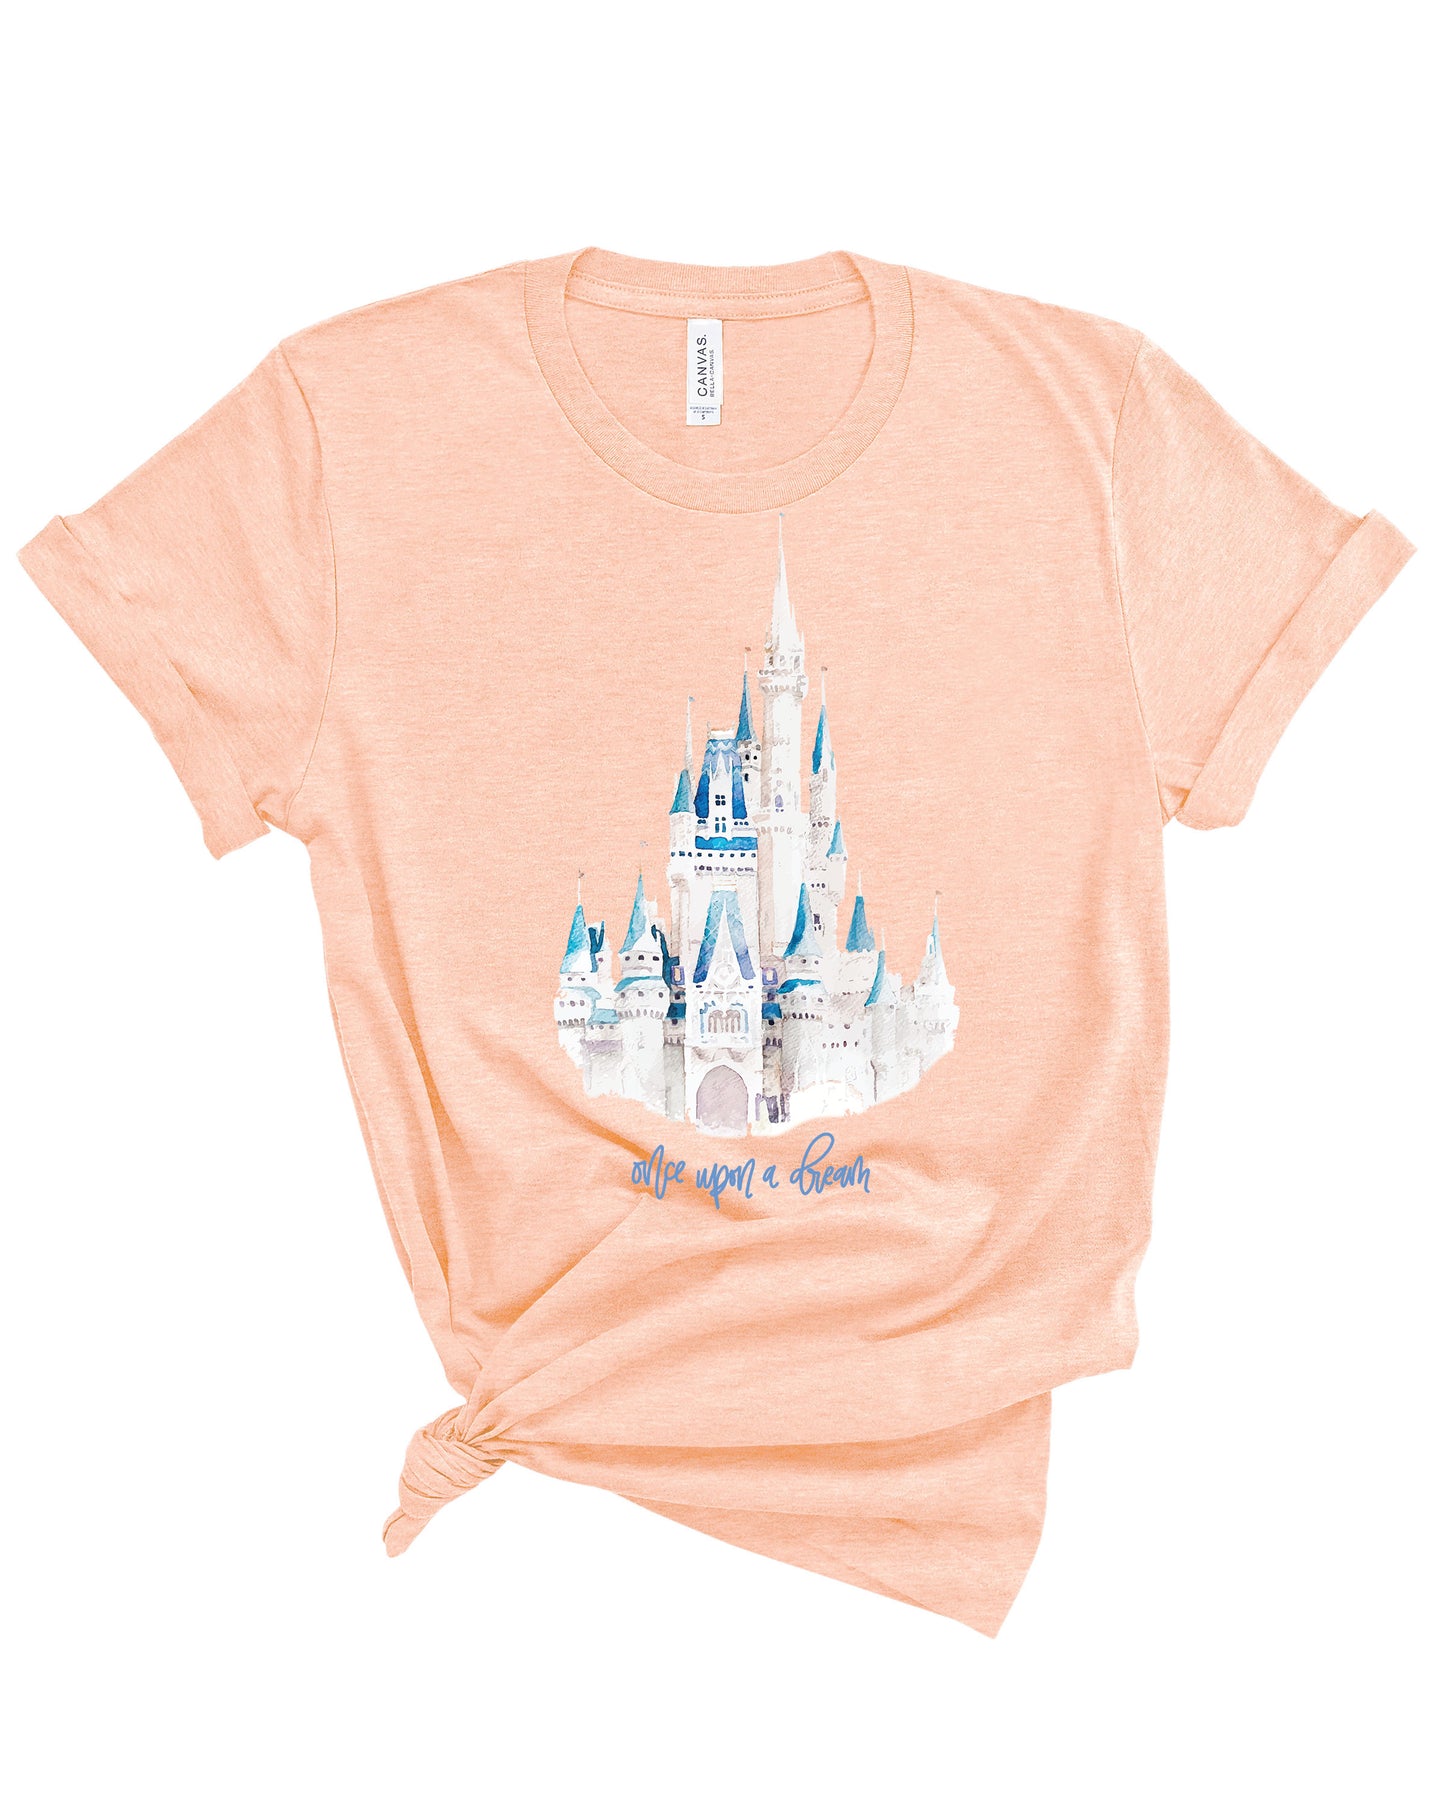 Once Upon A Dream | Tee | Kids-Sister Shirts-Sister Shirts, Cute & Custom Tees for Mama & Littles in Trussville, Alabama.